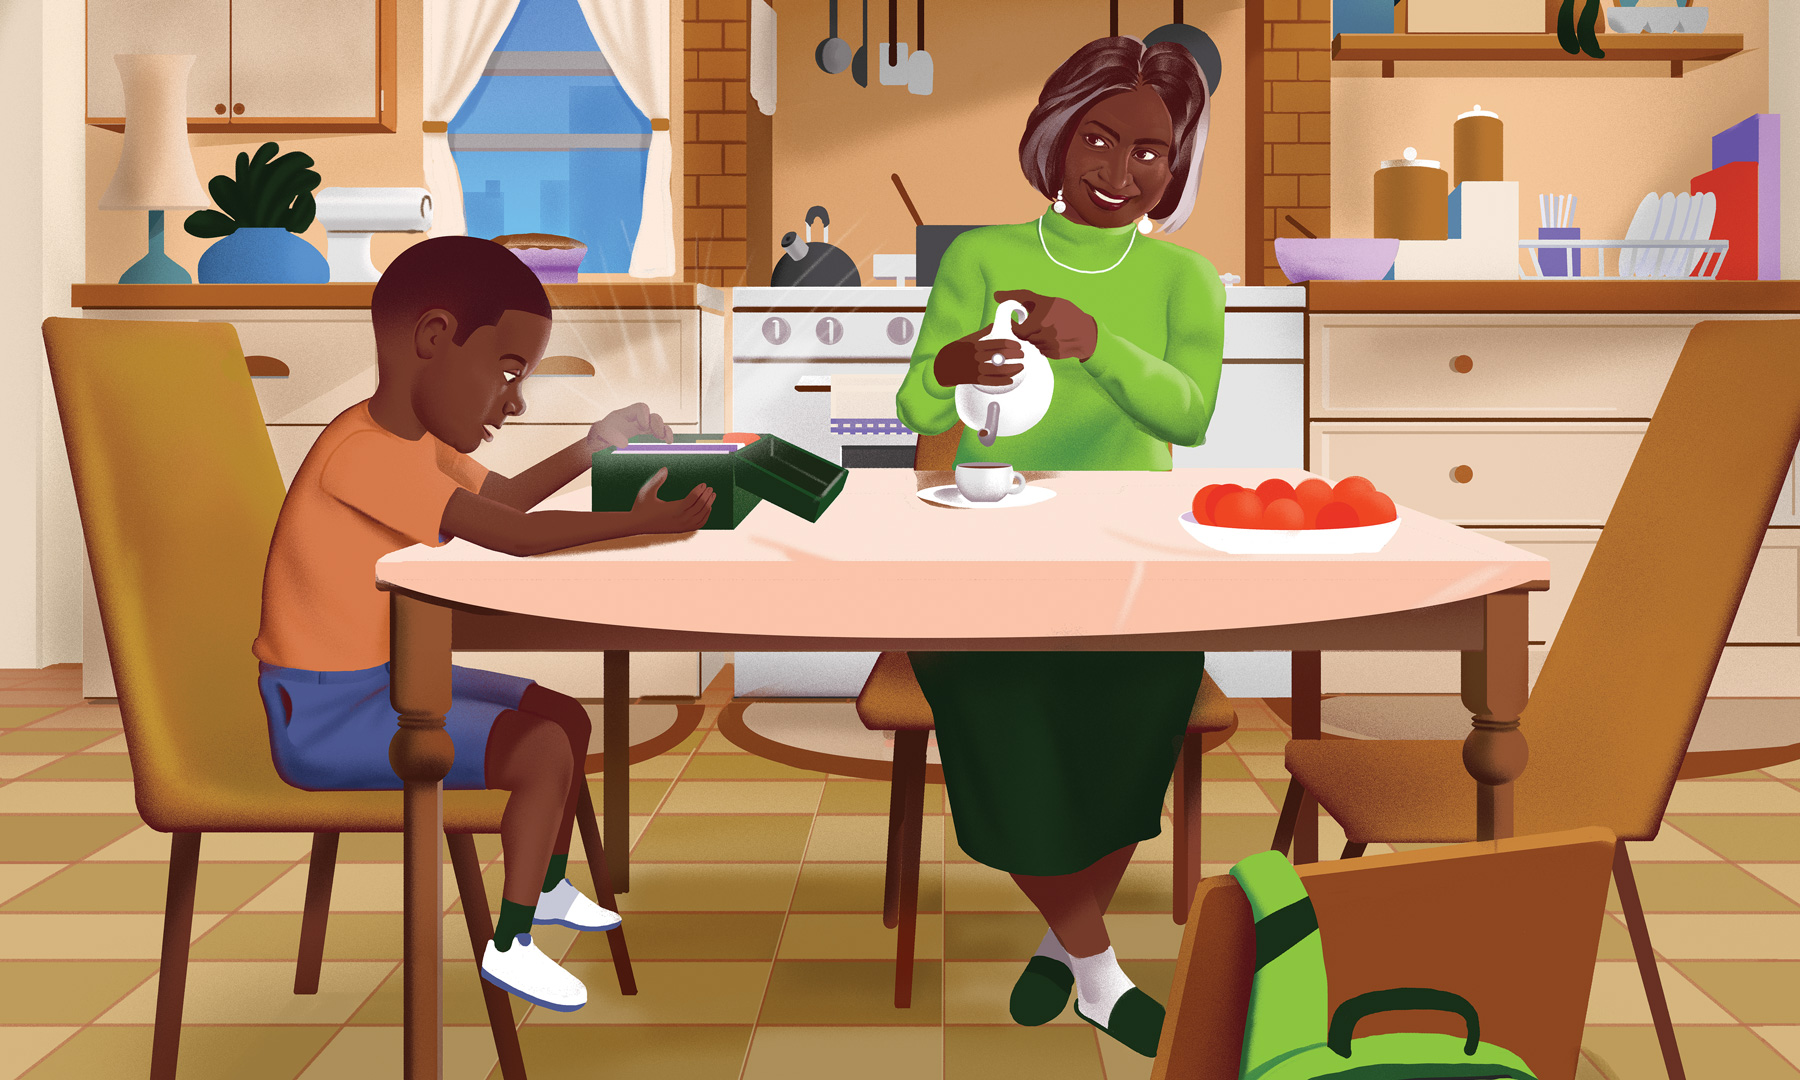 Illustration of a grandson and grandmother at a table together.